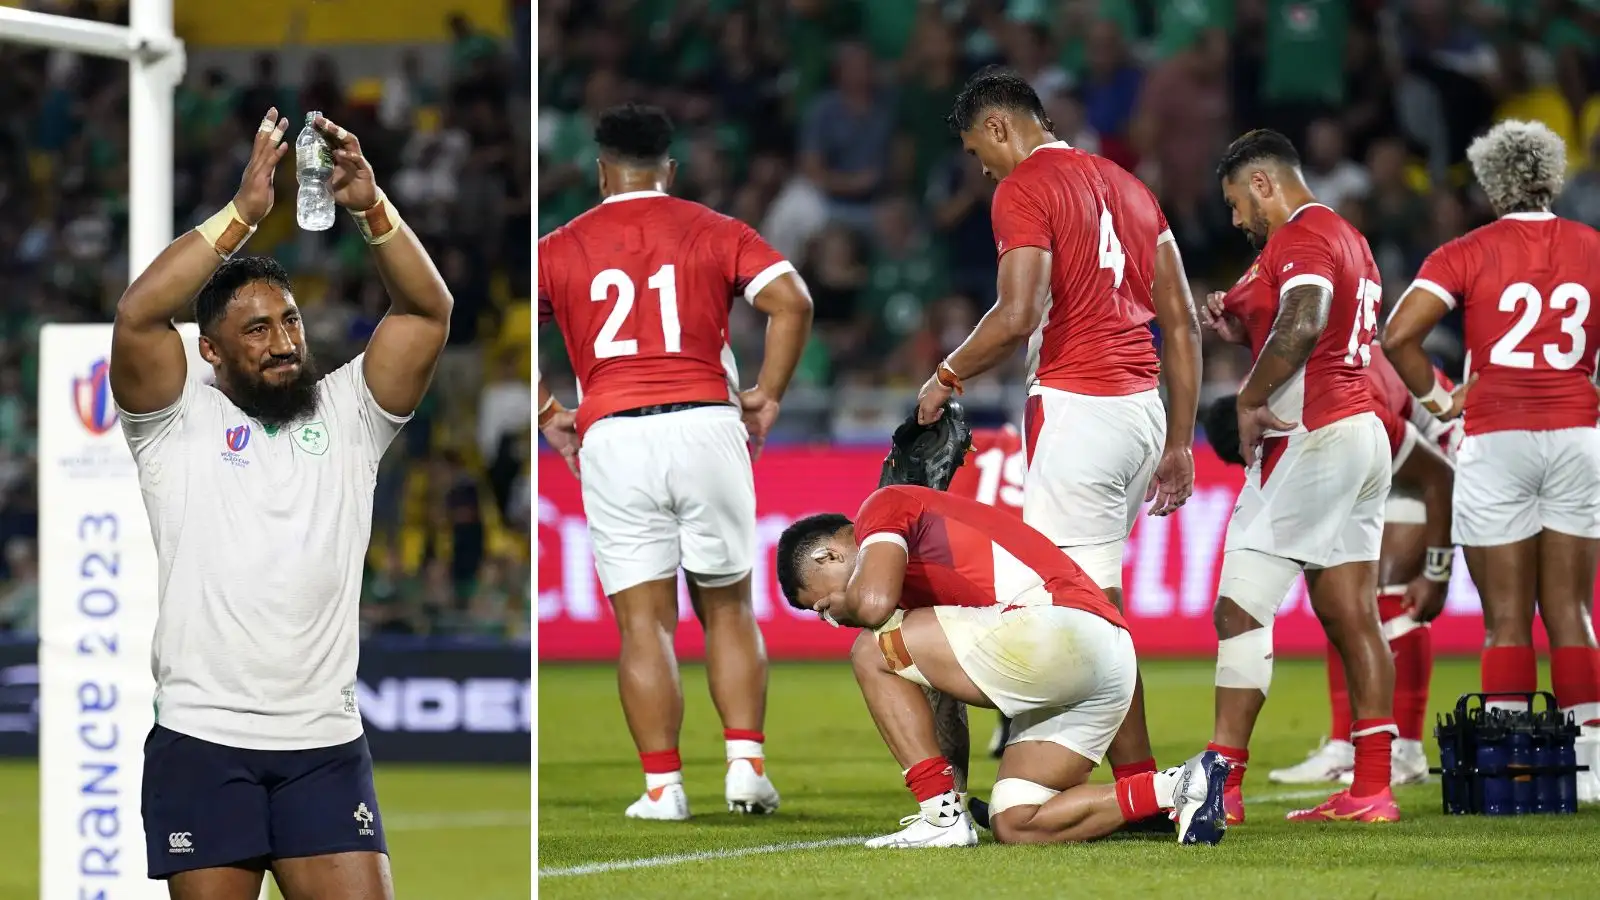 Ireland's Bundee Aki and the Tonga Rugby team after the Rugby World Cup clash